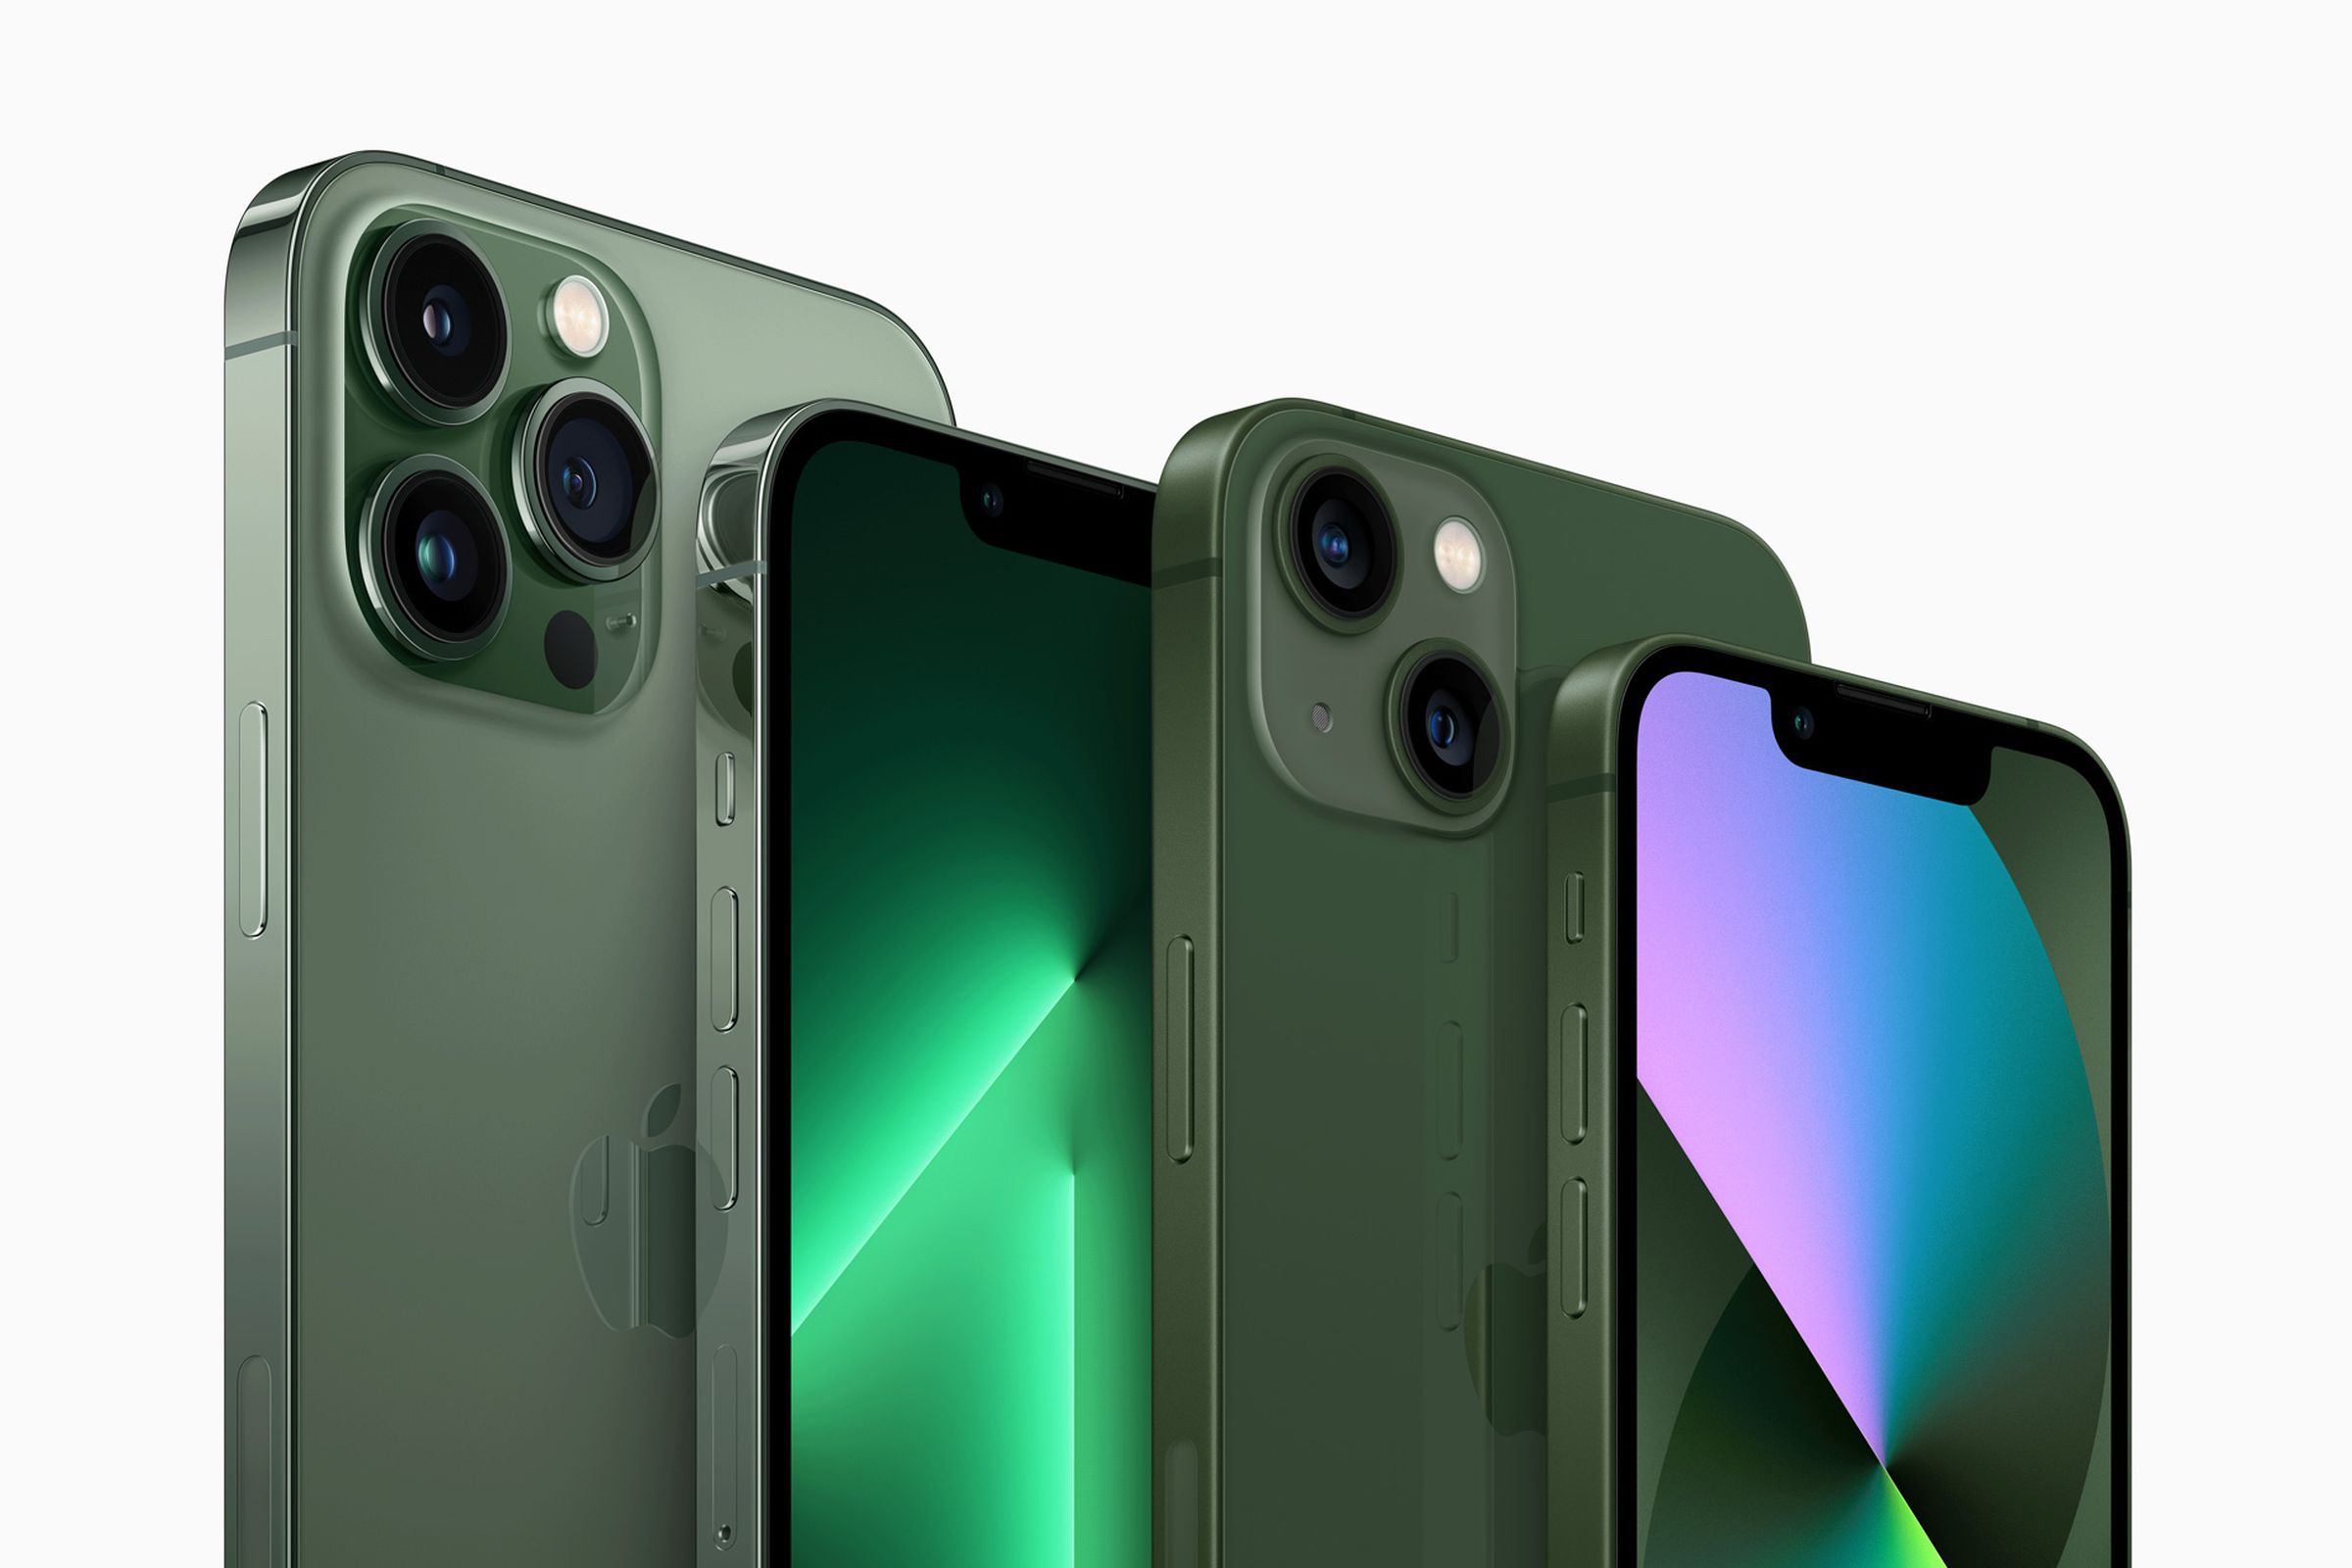 The iPhone 13 gets green, while the iPhone 13 Pro gets “alpine green.”